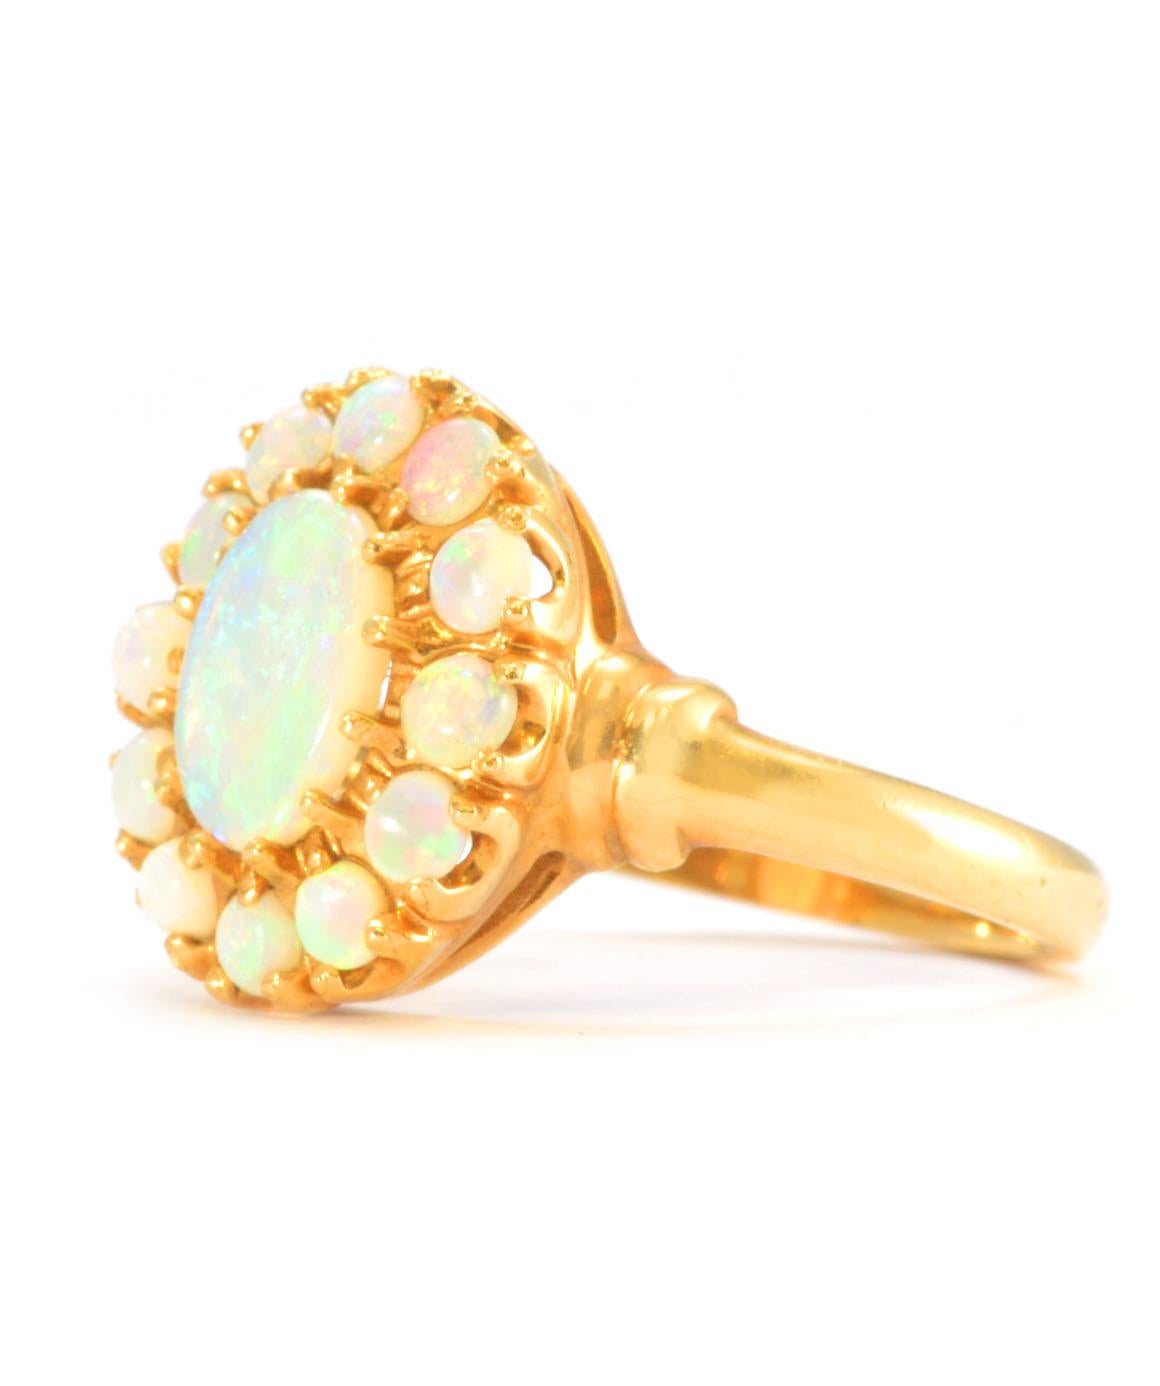 Solid 14K Yellow Gold Genuine Opal Halo Ring 3.2g
Excellent condition. This solid 14K yellow gold ring features a center oval opal stone that measures approximately 8.13mm X 6.20mm. It is surrounded 12 round opal stones that measure approximately